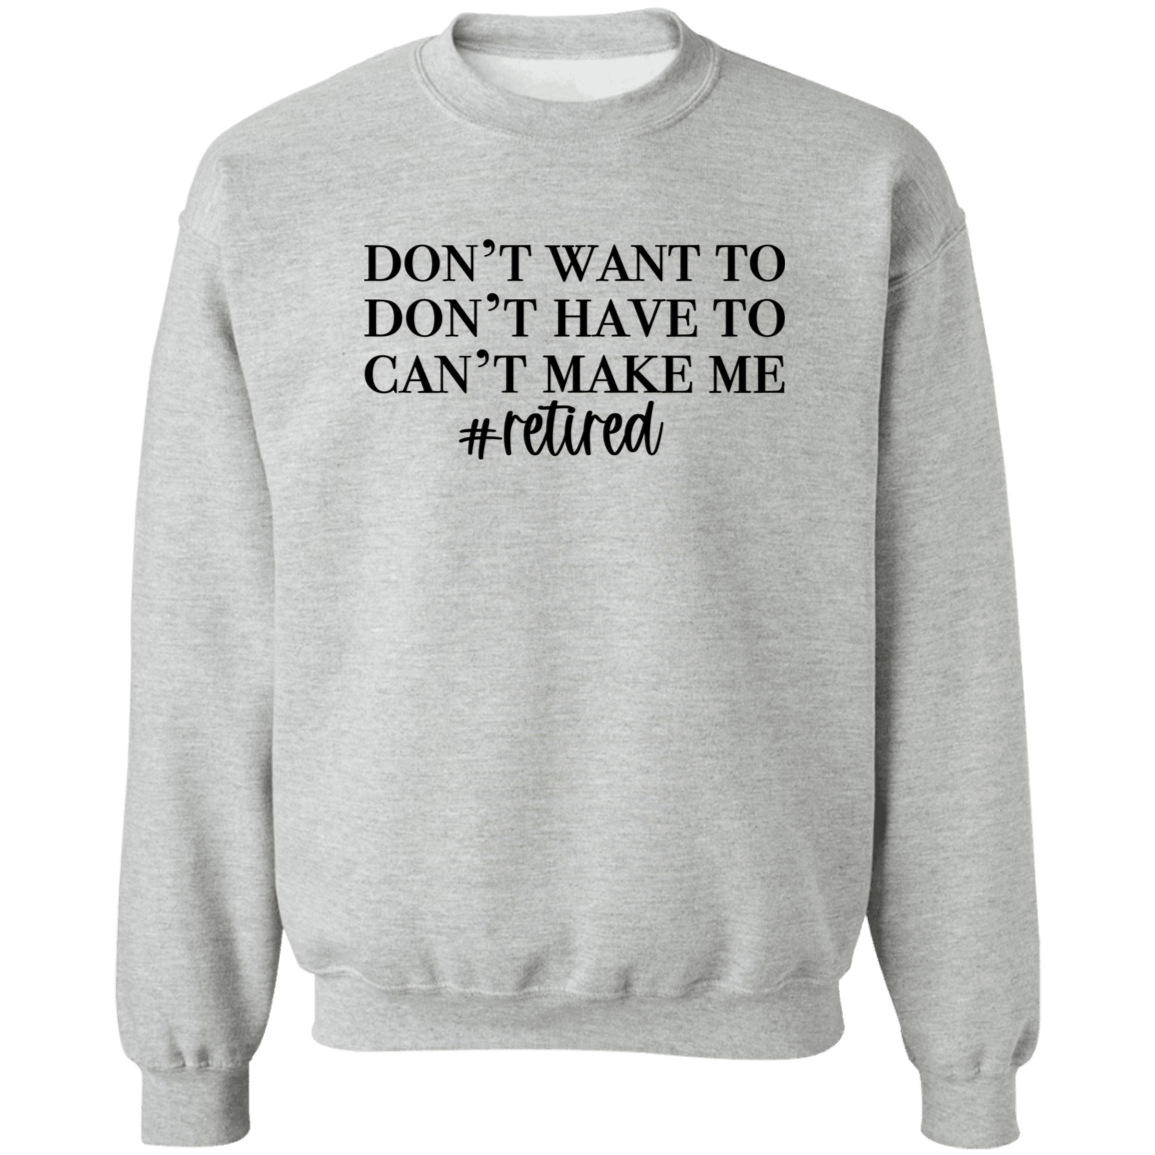 Don't want to Crewneck Pullover Sweatshirt